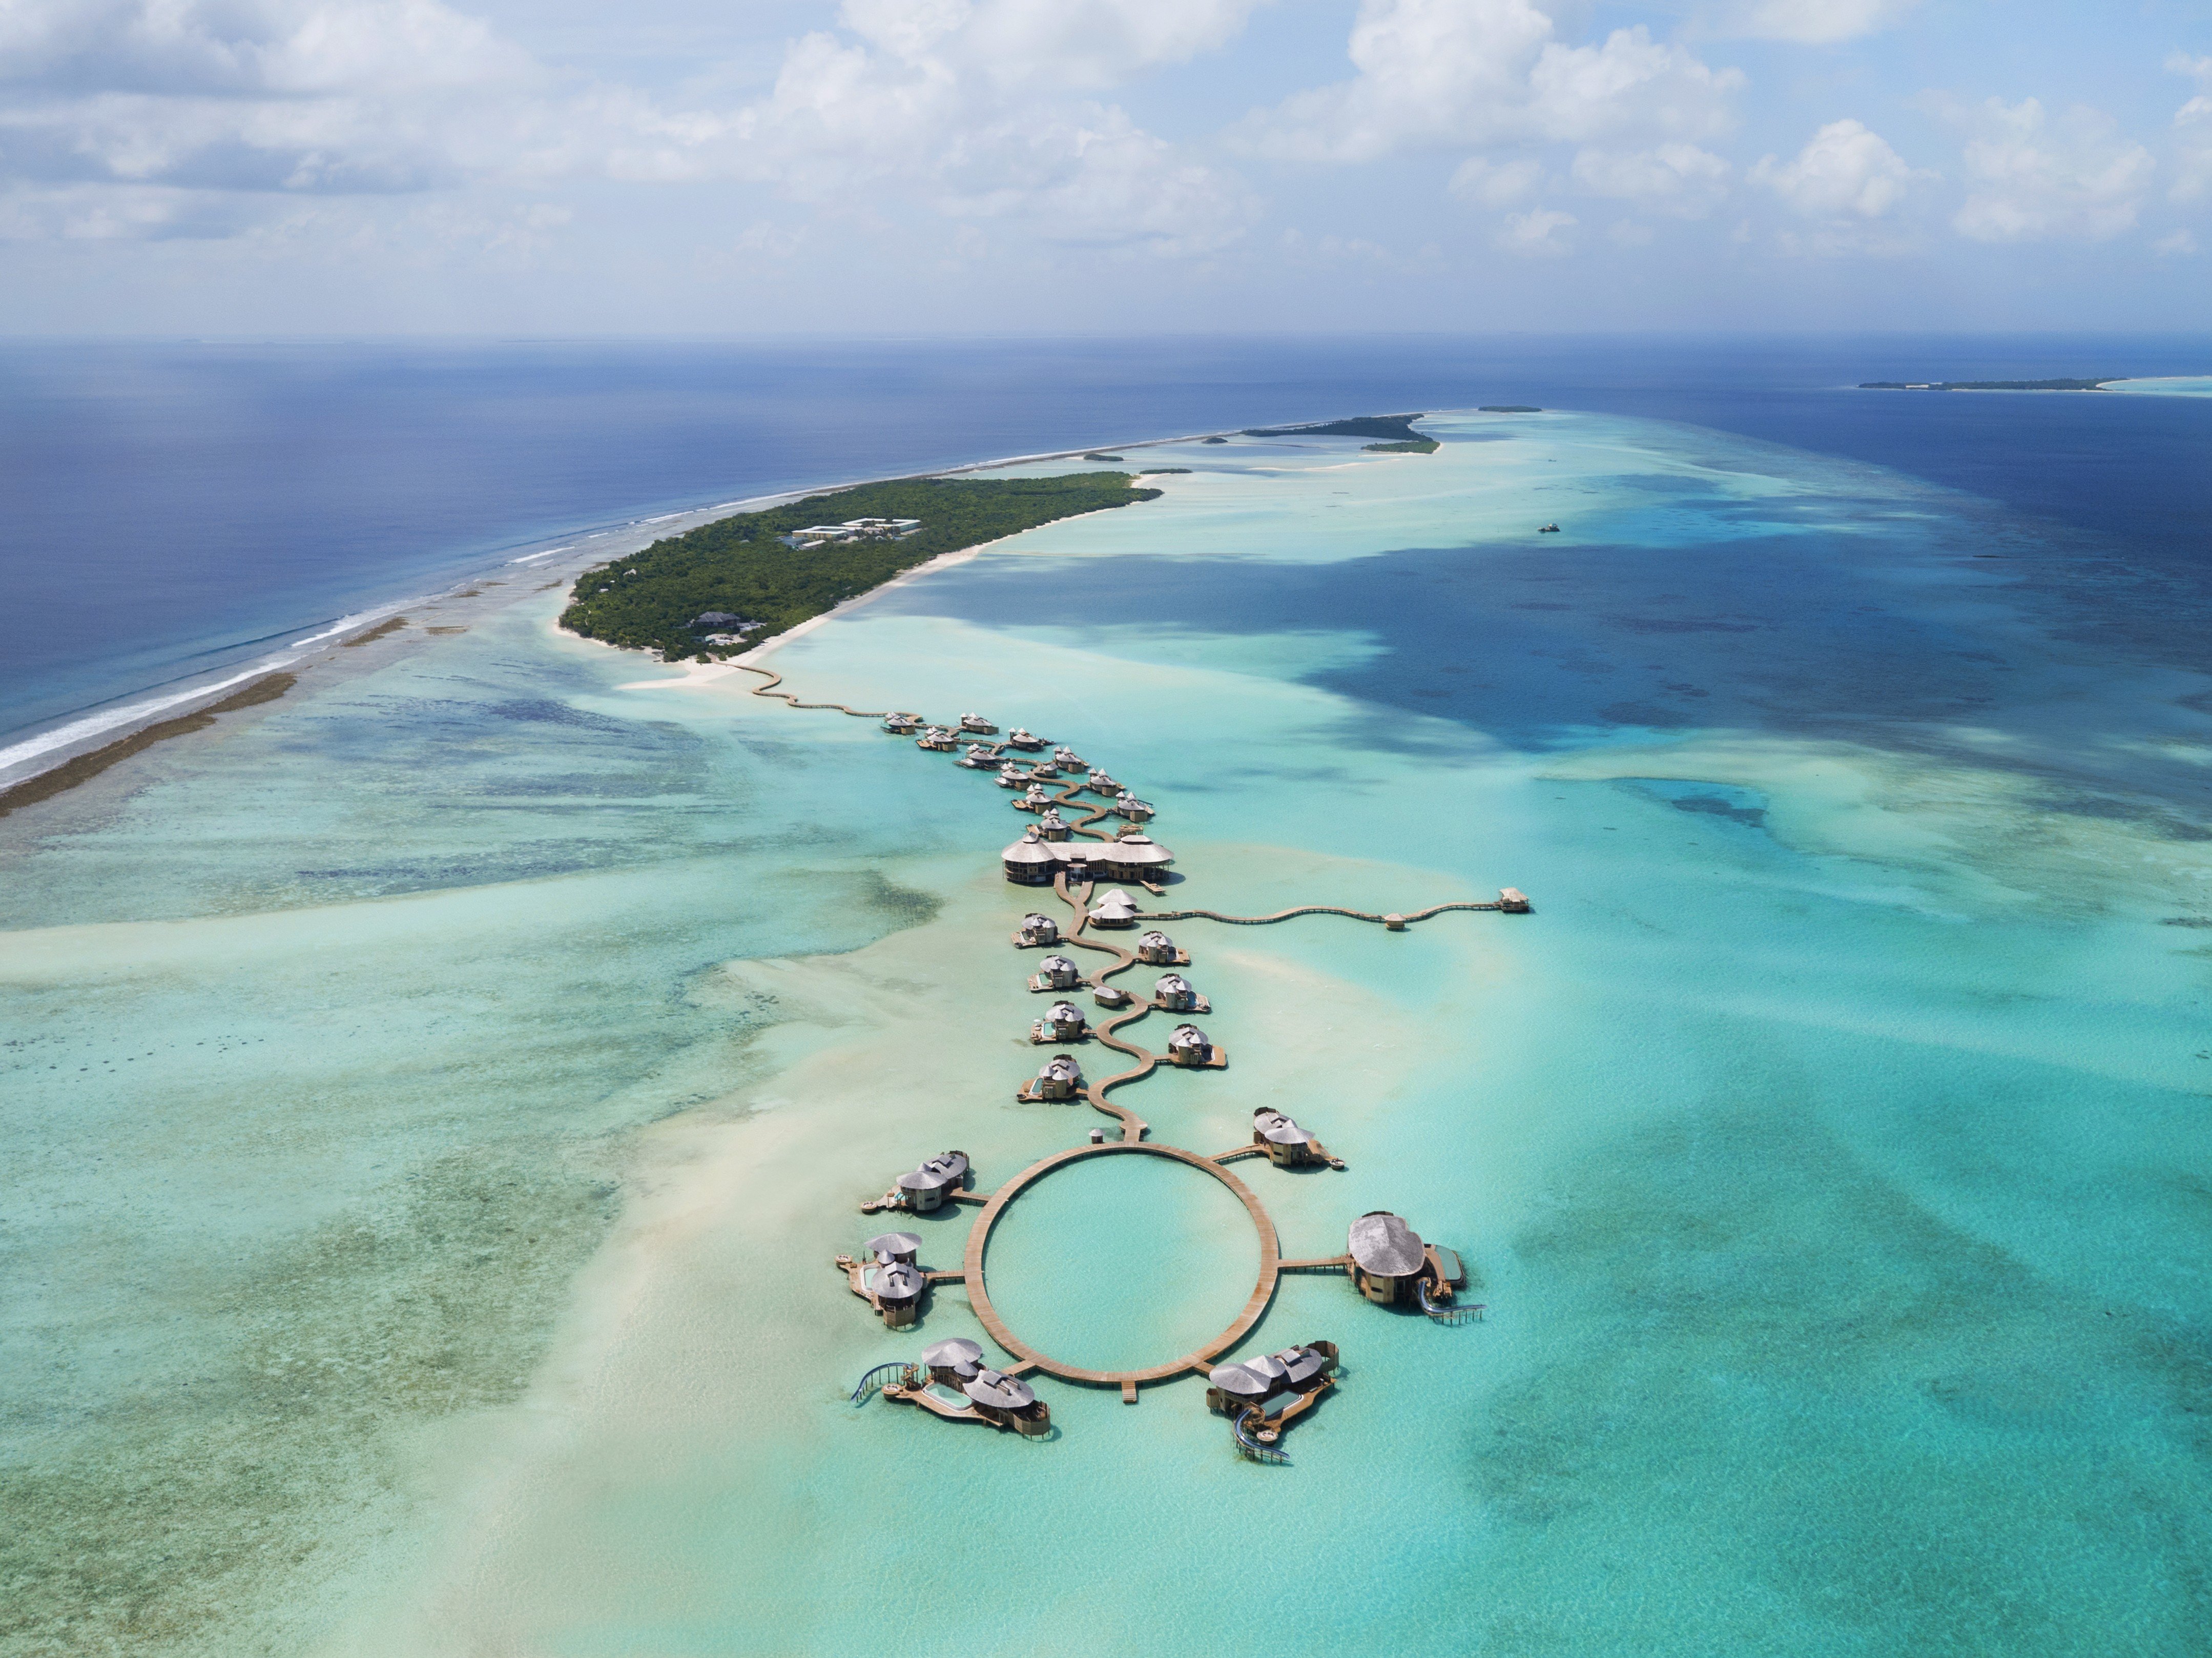 Soneva Jani, a resort in the Maldives, joins a string of new luxury hotels that prioritise sustainability